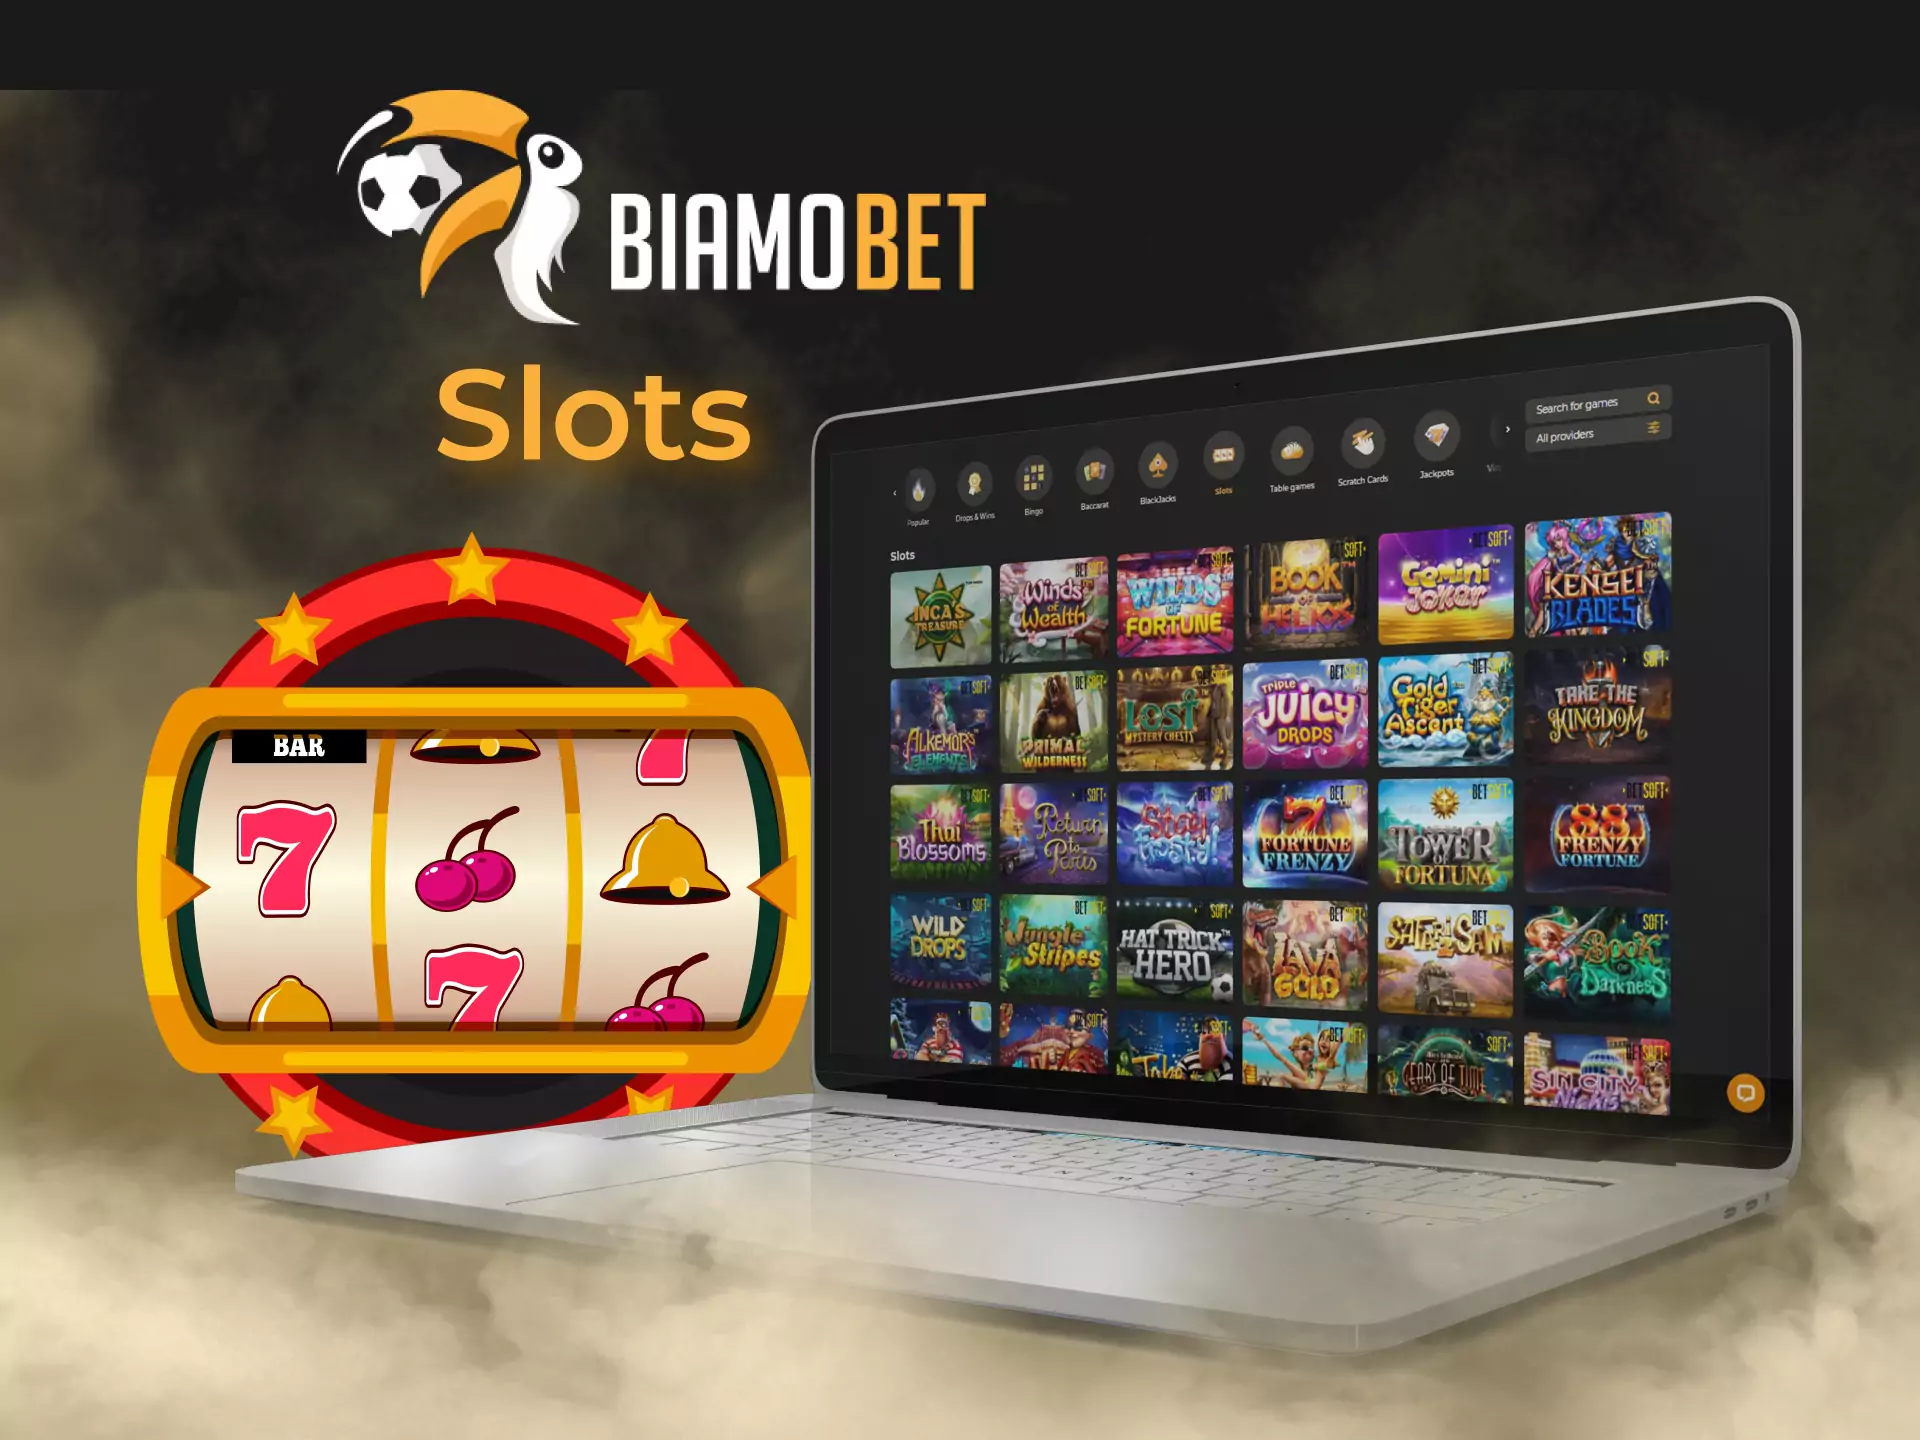 Slots machines are widely presented in the Biamobet Casino.